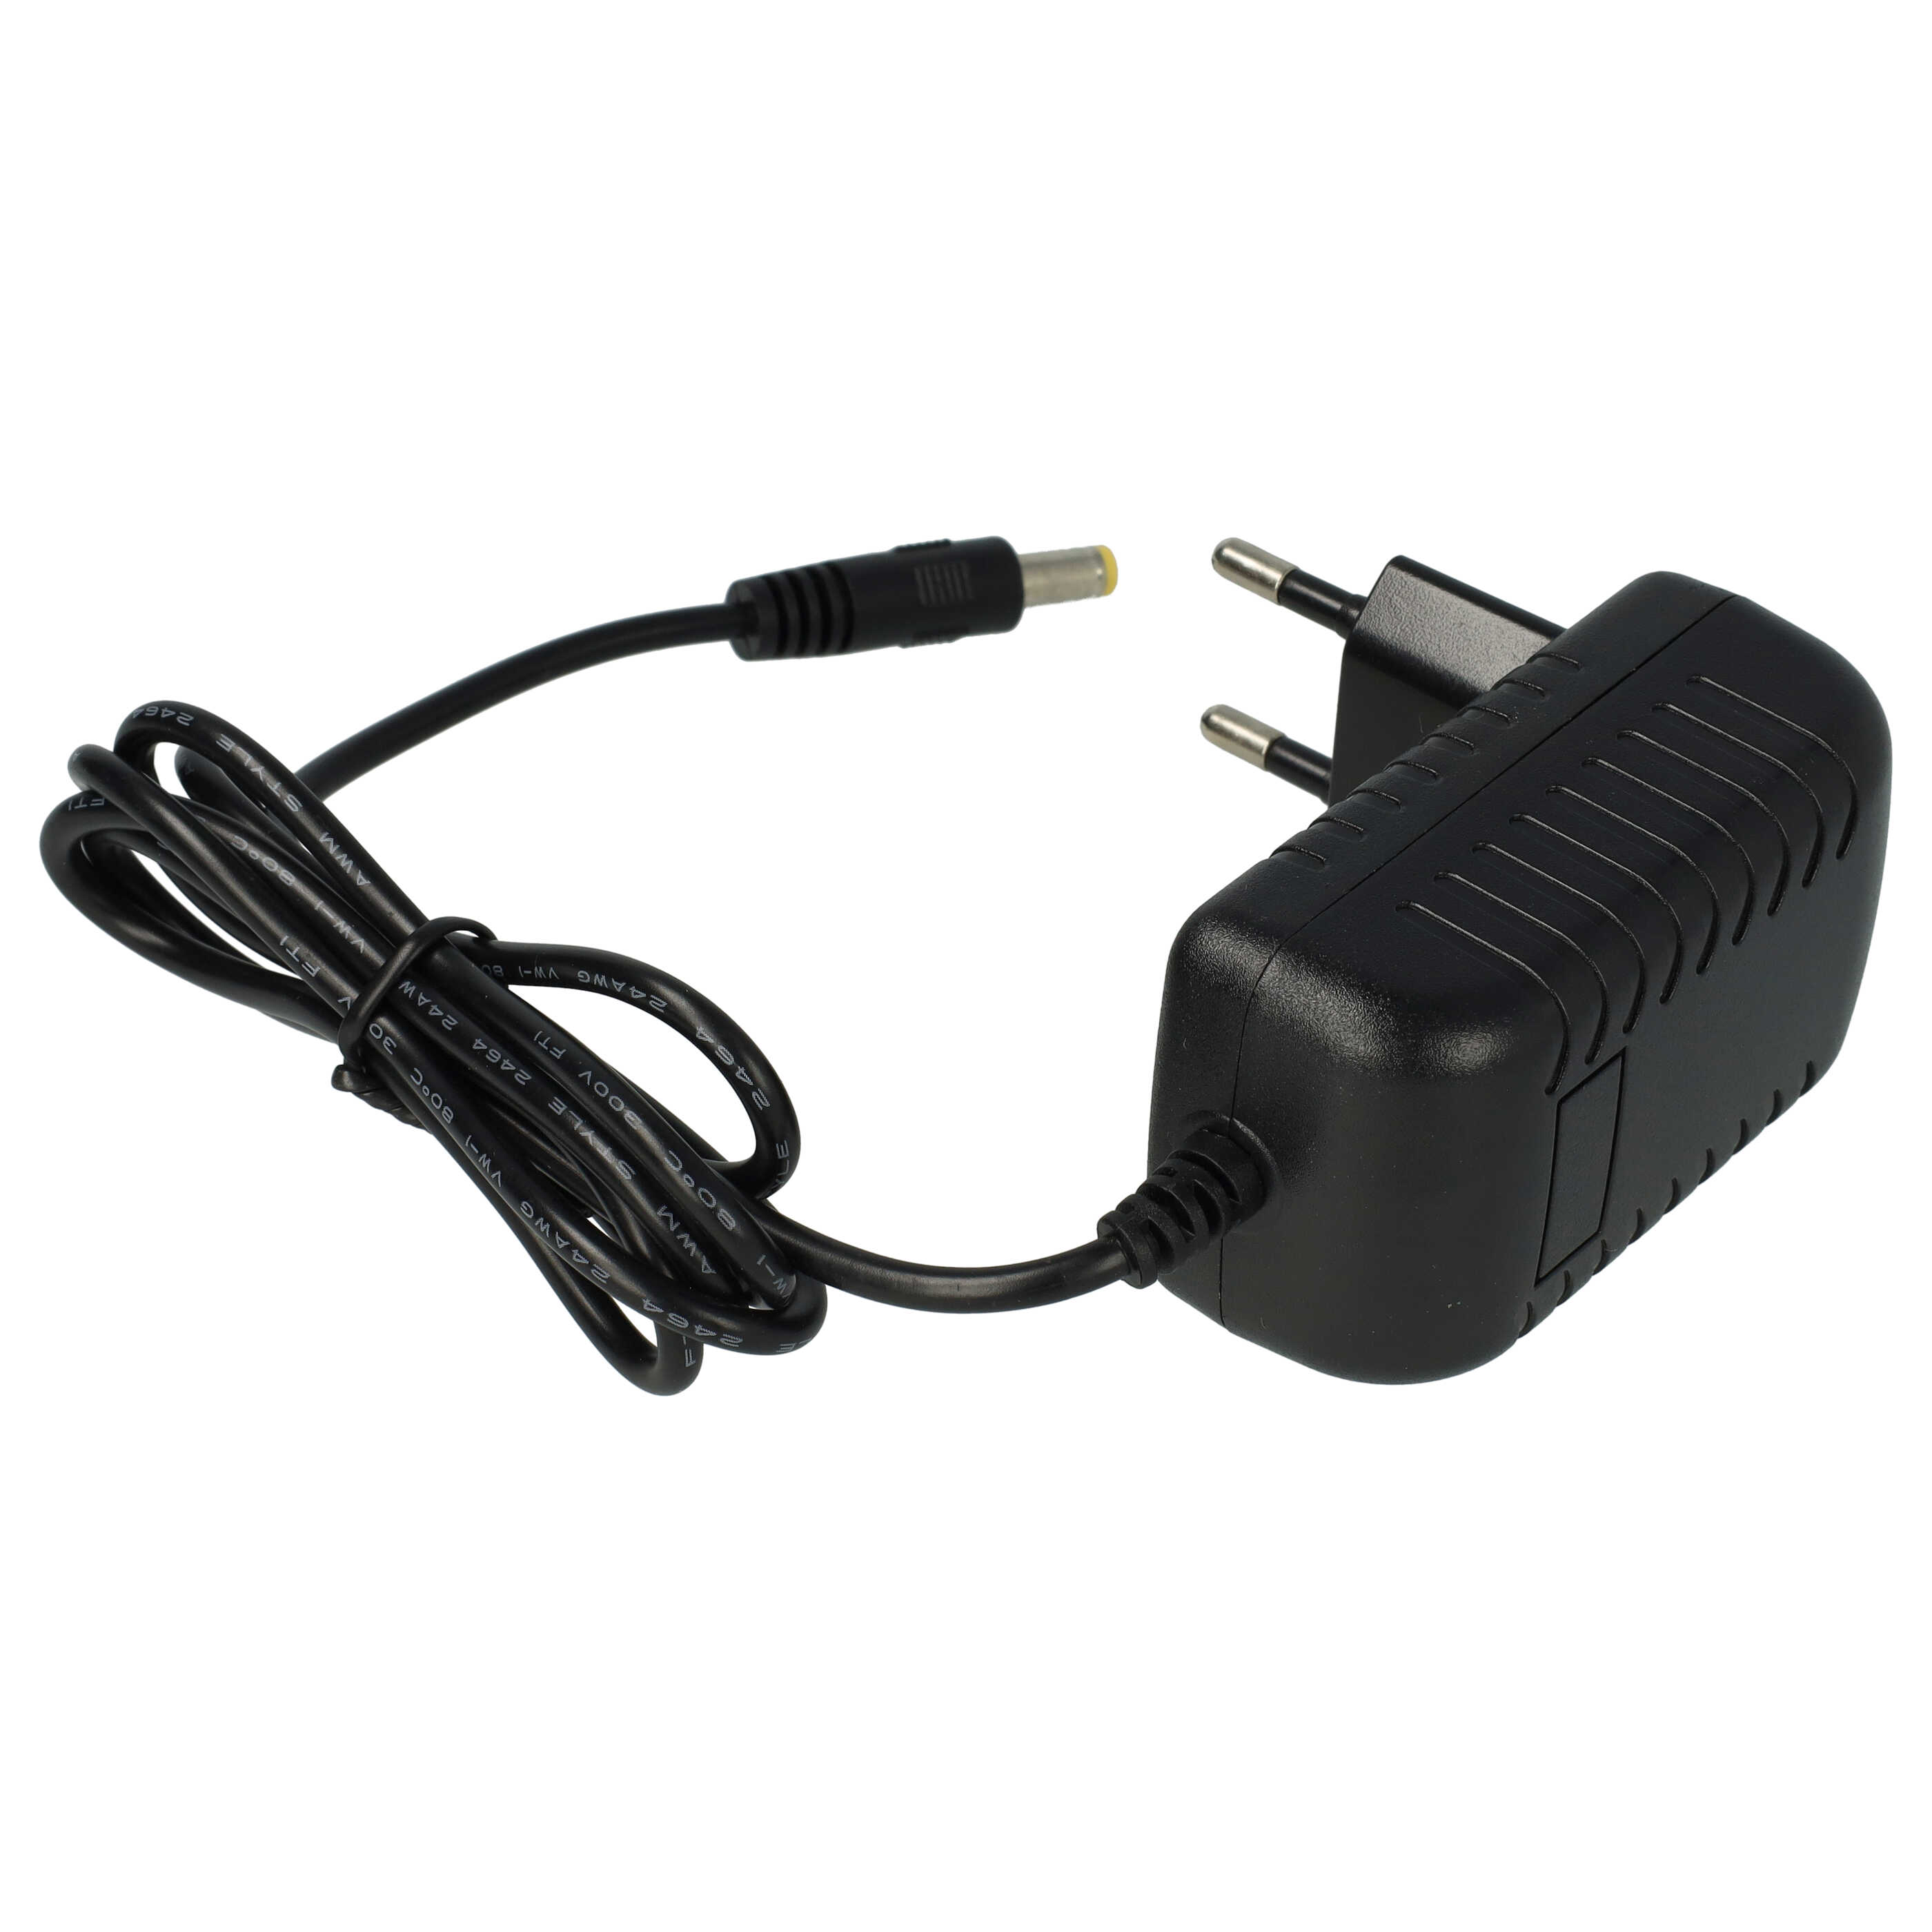 Mains Power Adapter suitable for 6490 AVM hard drive, speakers, router etc. - 115 cm